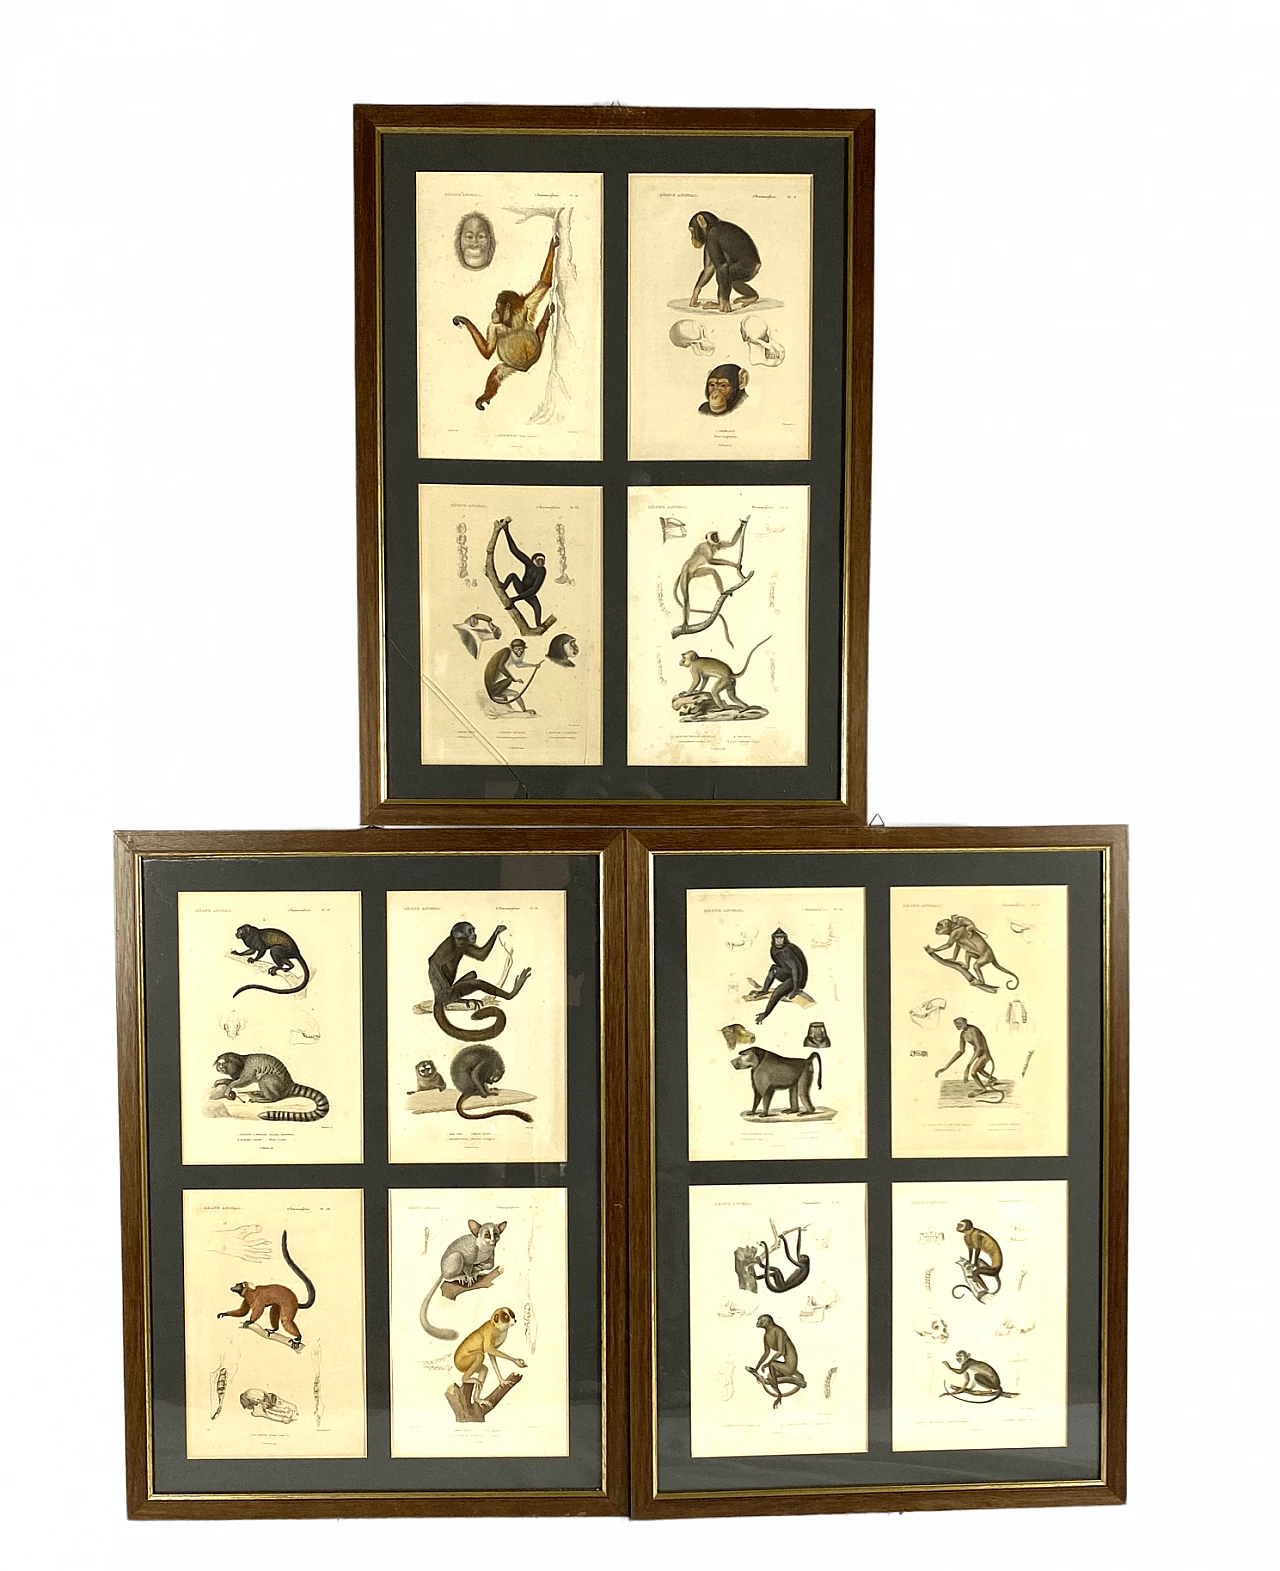 3 Framed panels with 12 engravings from "Le Règne Animal" Georges Cuvier, 19th century 1470804